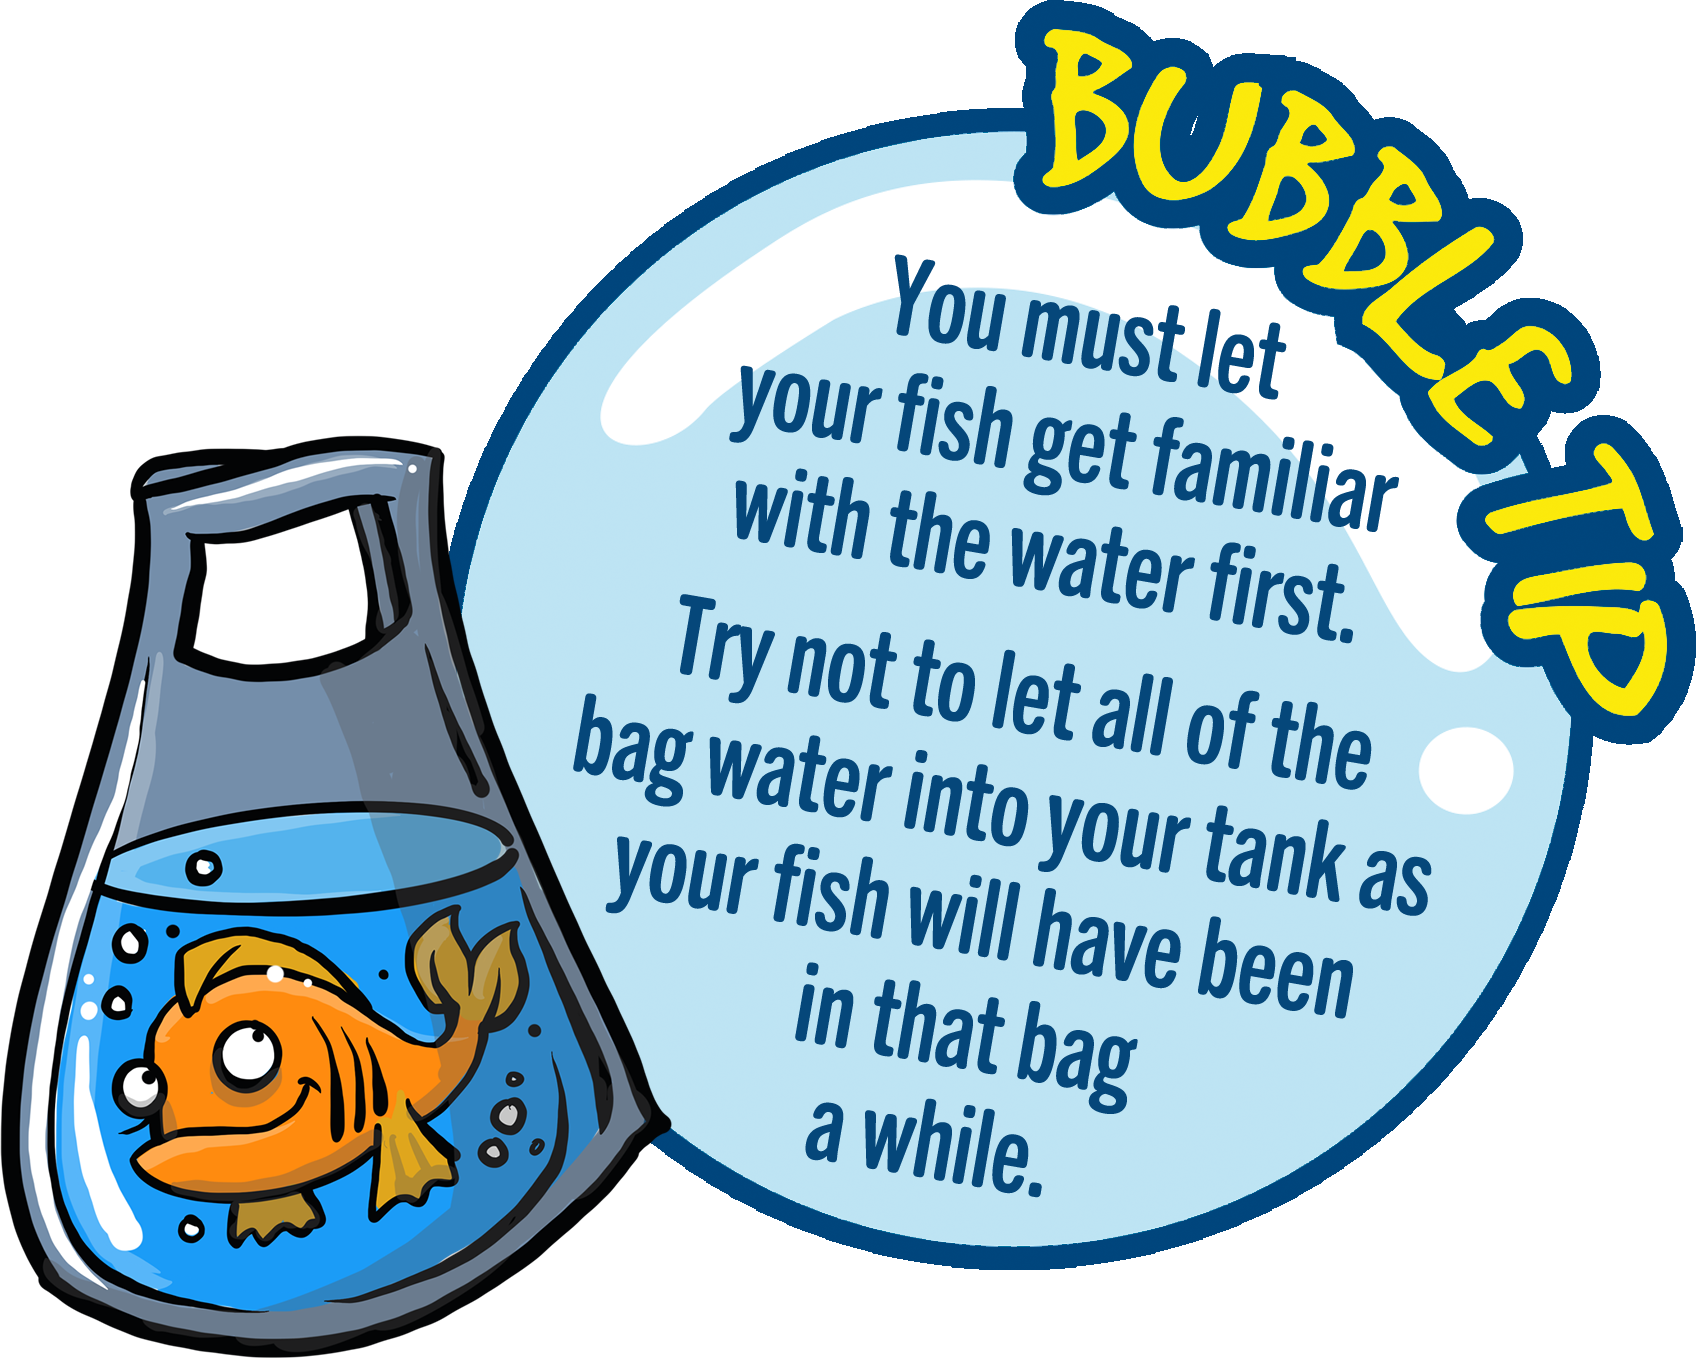 You must let your fish get familiar with the water first. Try not to let all of the bag water into your tank as your fish will have been in that bag a while.